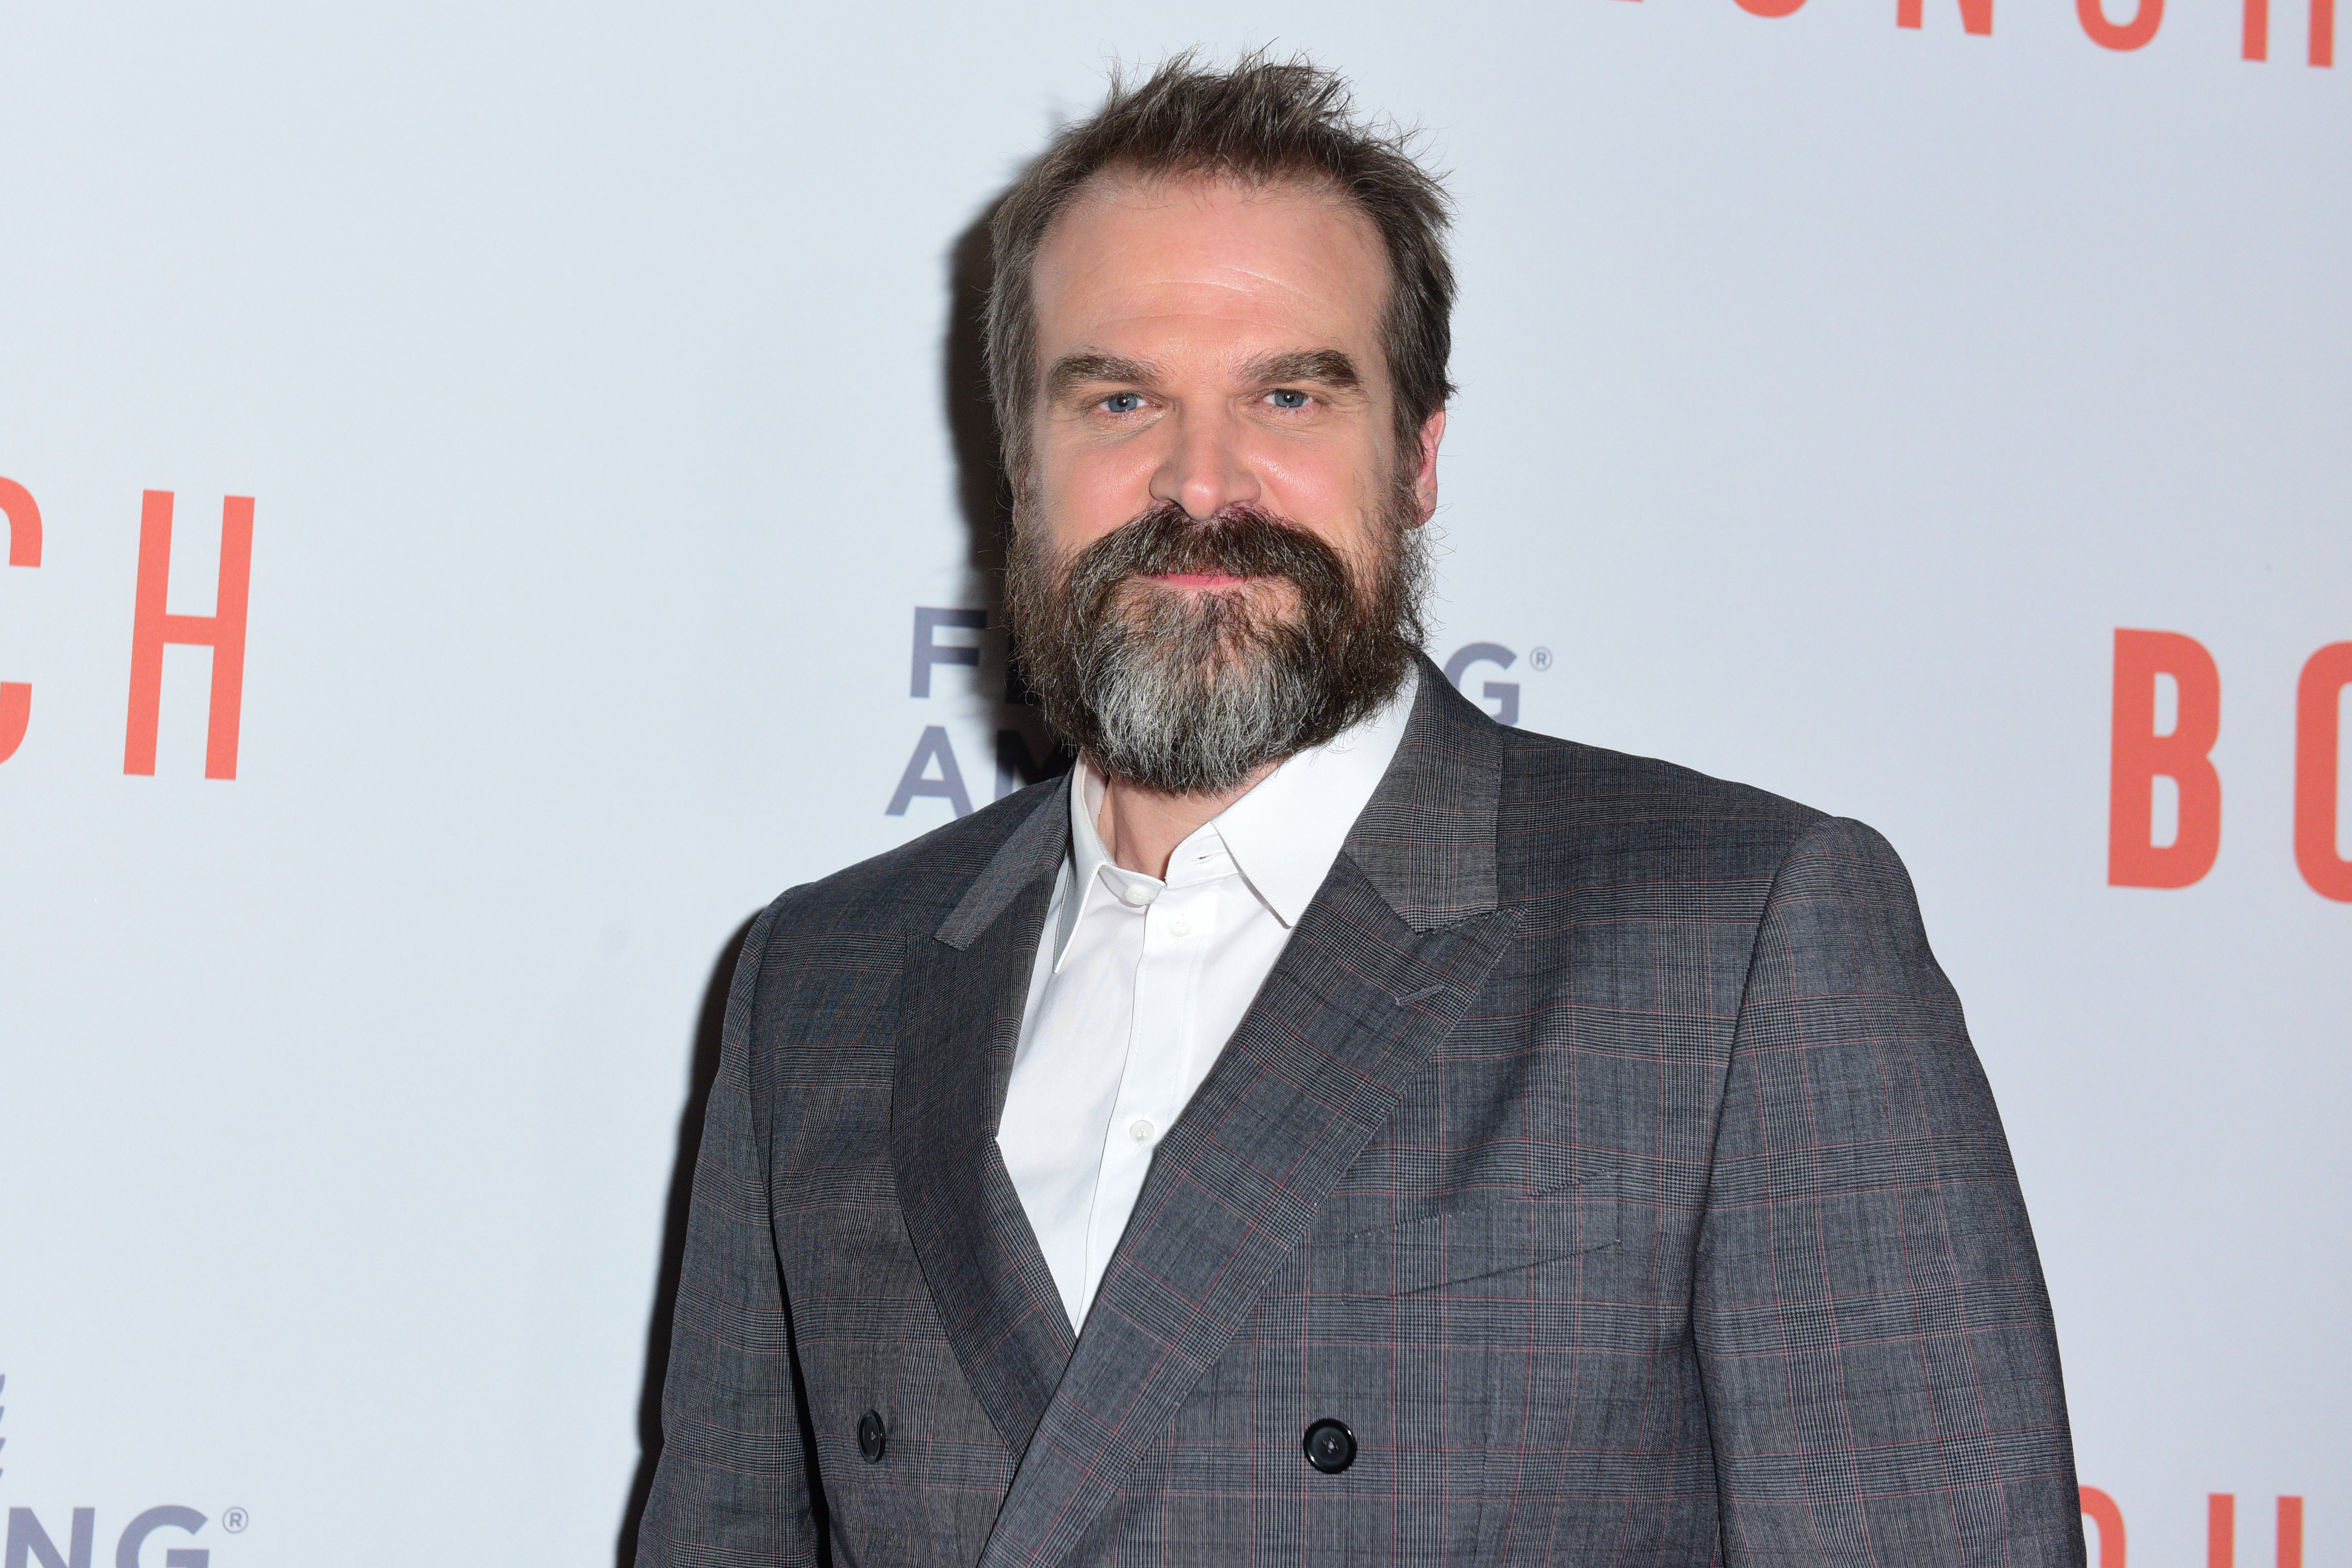 David Harbour at a red carpet event, wearing a gray suit jacket with a white dress shirt, smiling